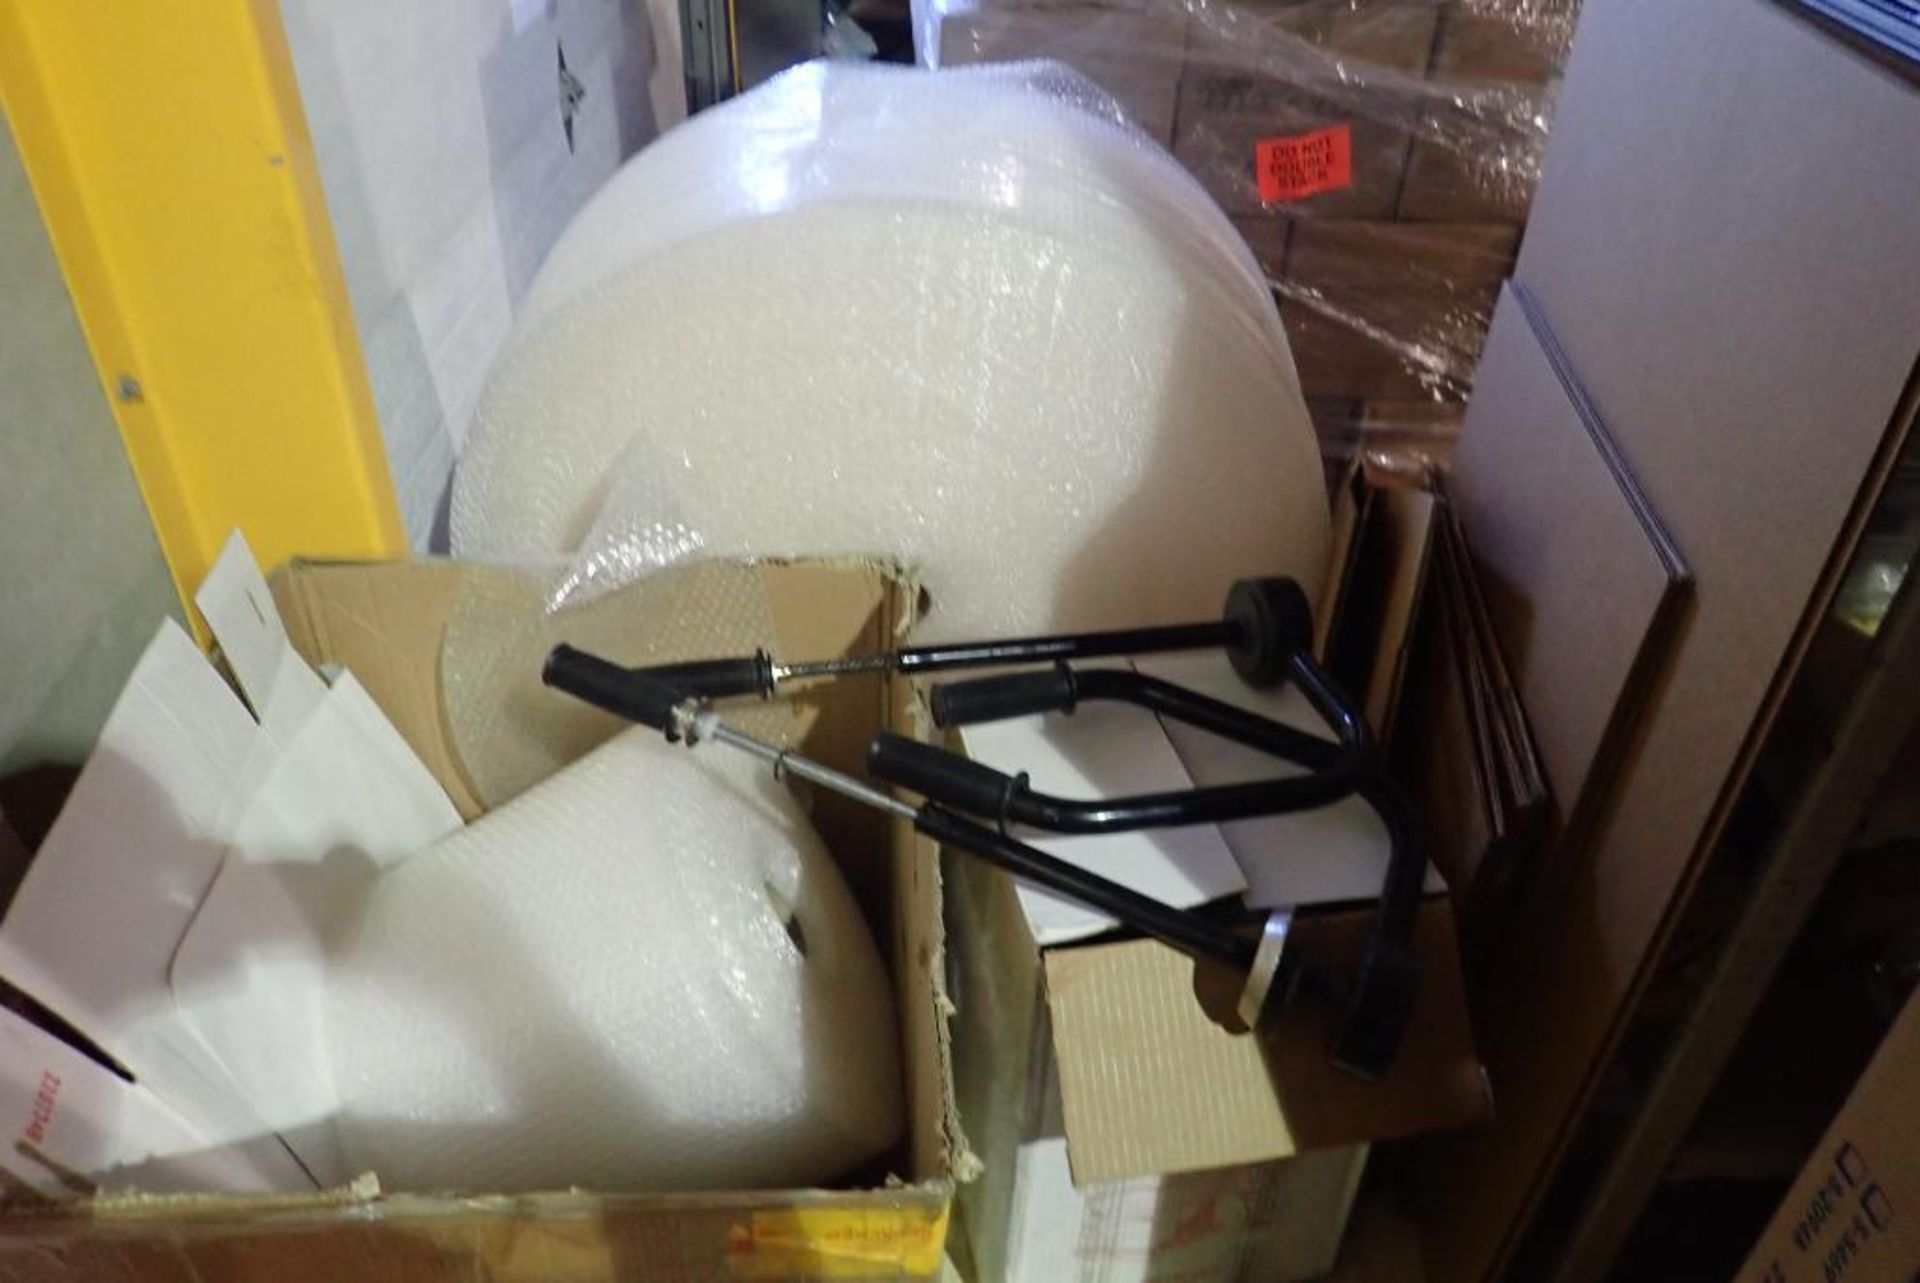 Lot of Asst. Shipping Supplies, Shipping Tubes, Foam Inserts, Cabinets, etc. - Image 2 of 5